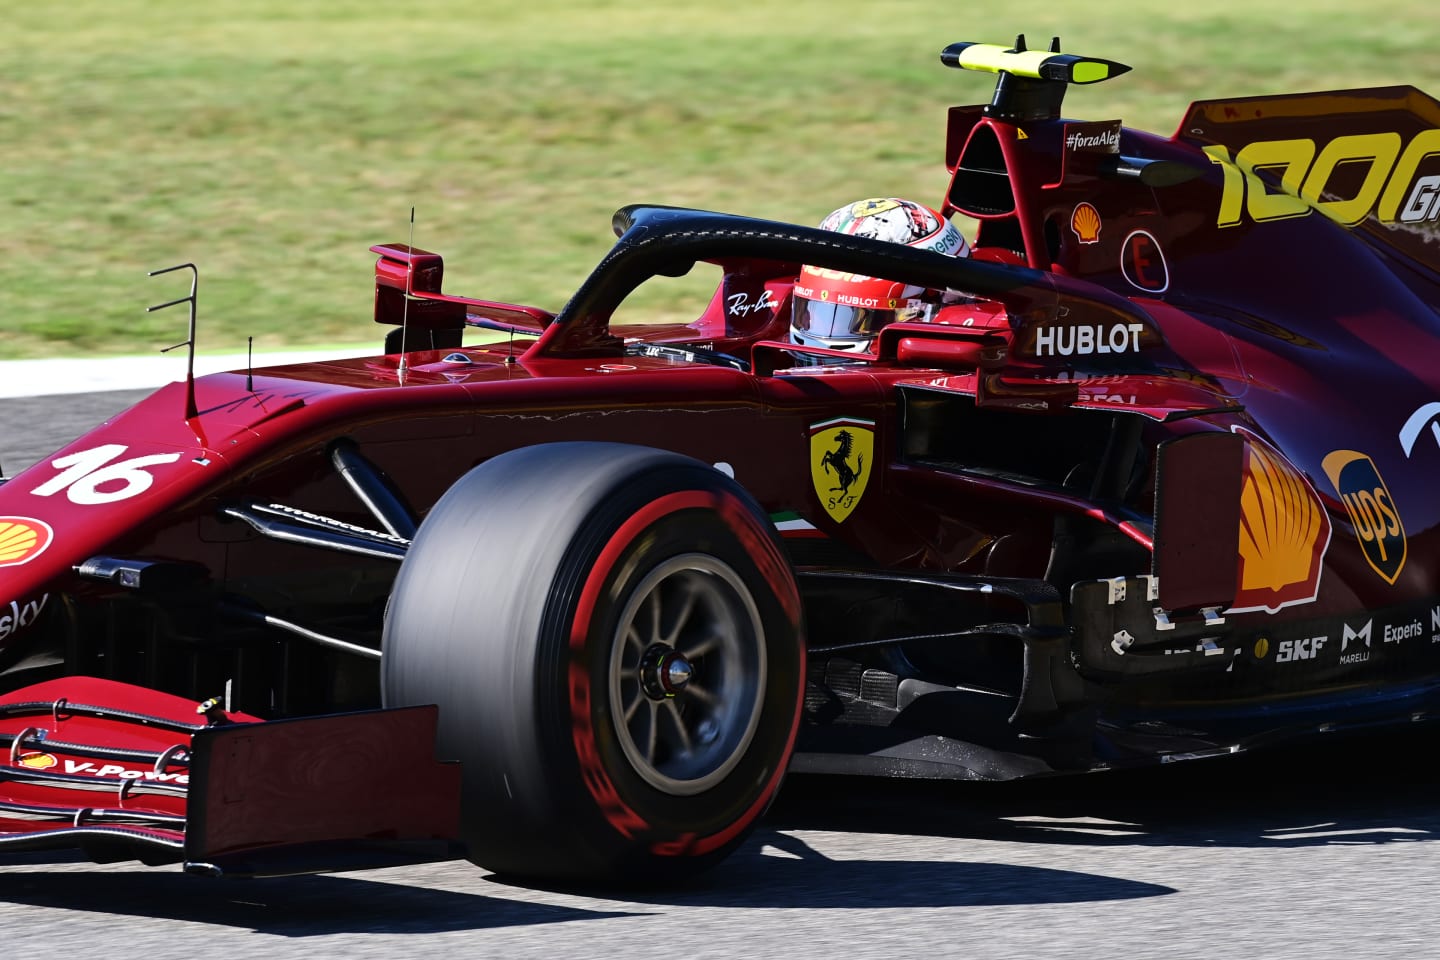 SCARPERIA, ITALY - SEPTEMBER 12: Charles Leclerc of Monaco driving the (16) Scuderia Ferrari SF1000 on track during qualifying for the F1 Grand Prix of Tuscany at Mugello Circuit on September 12, 2020 in Scarperia, Italy. (Photo by Miguel Medina - Pool/Getty Images)